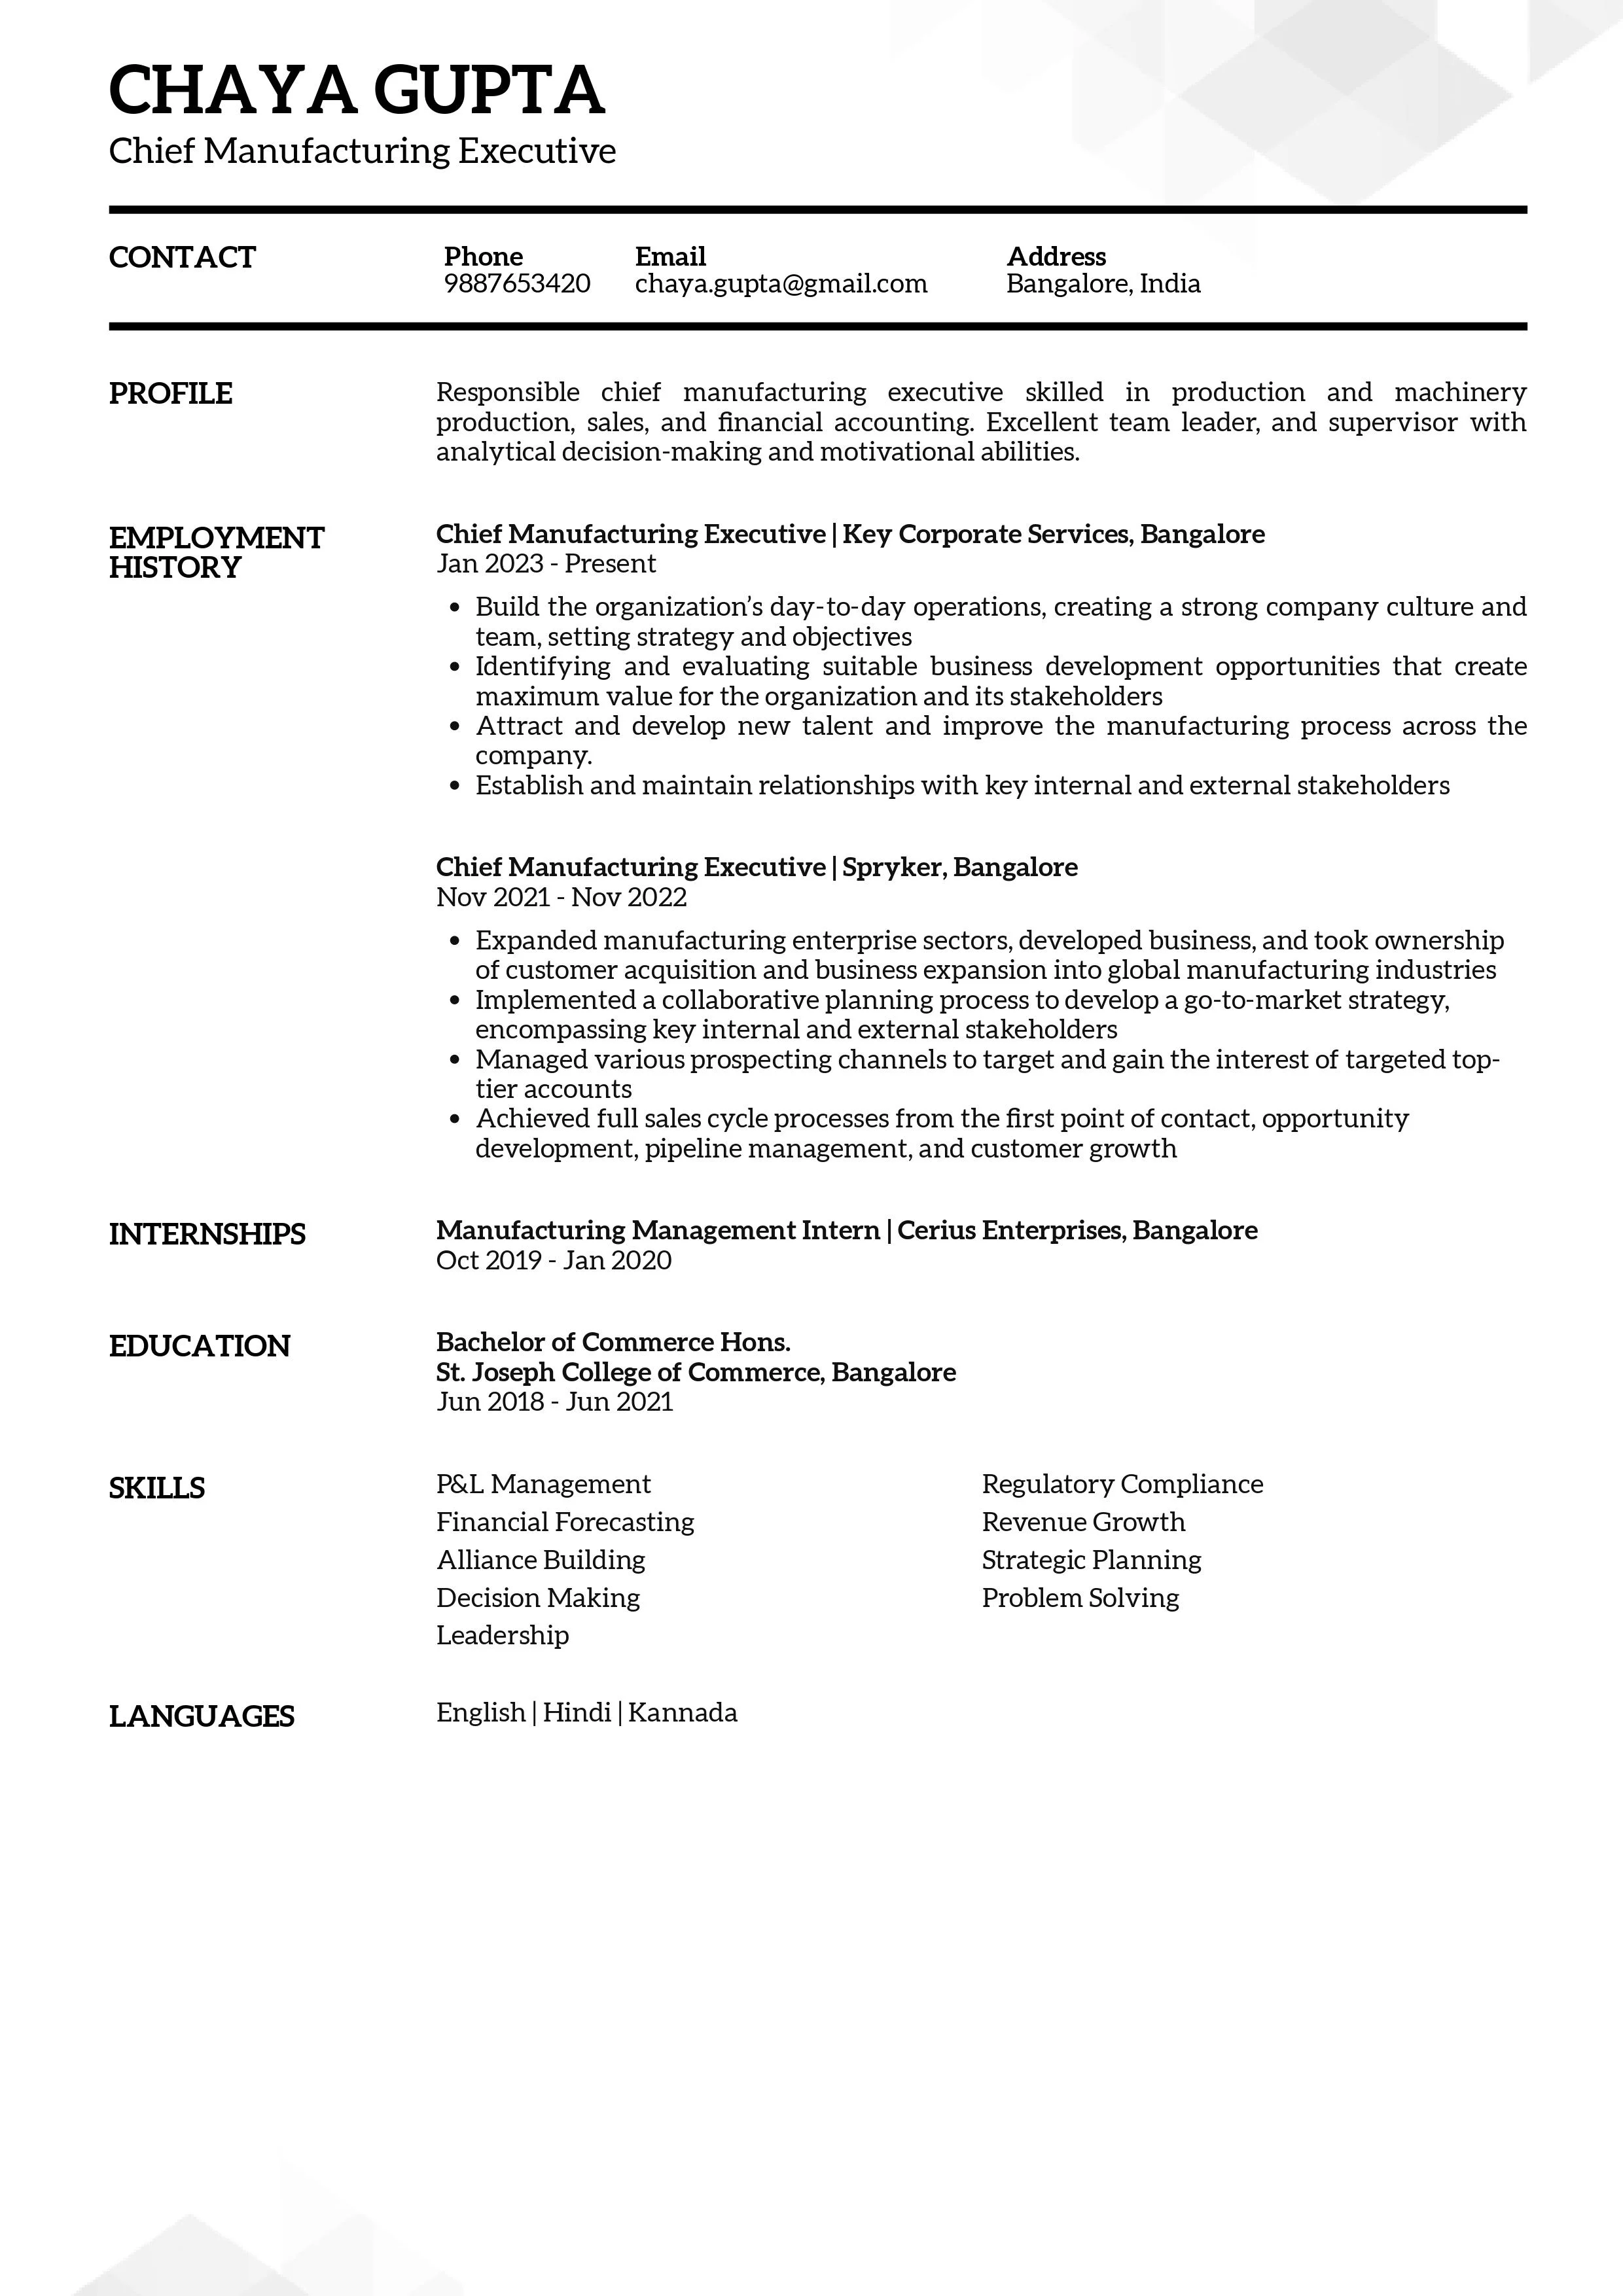 Sample Resume of Chief Manufacturing Executive | Free Resume Templates & Samples on Resumod.co